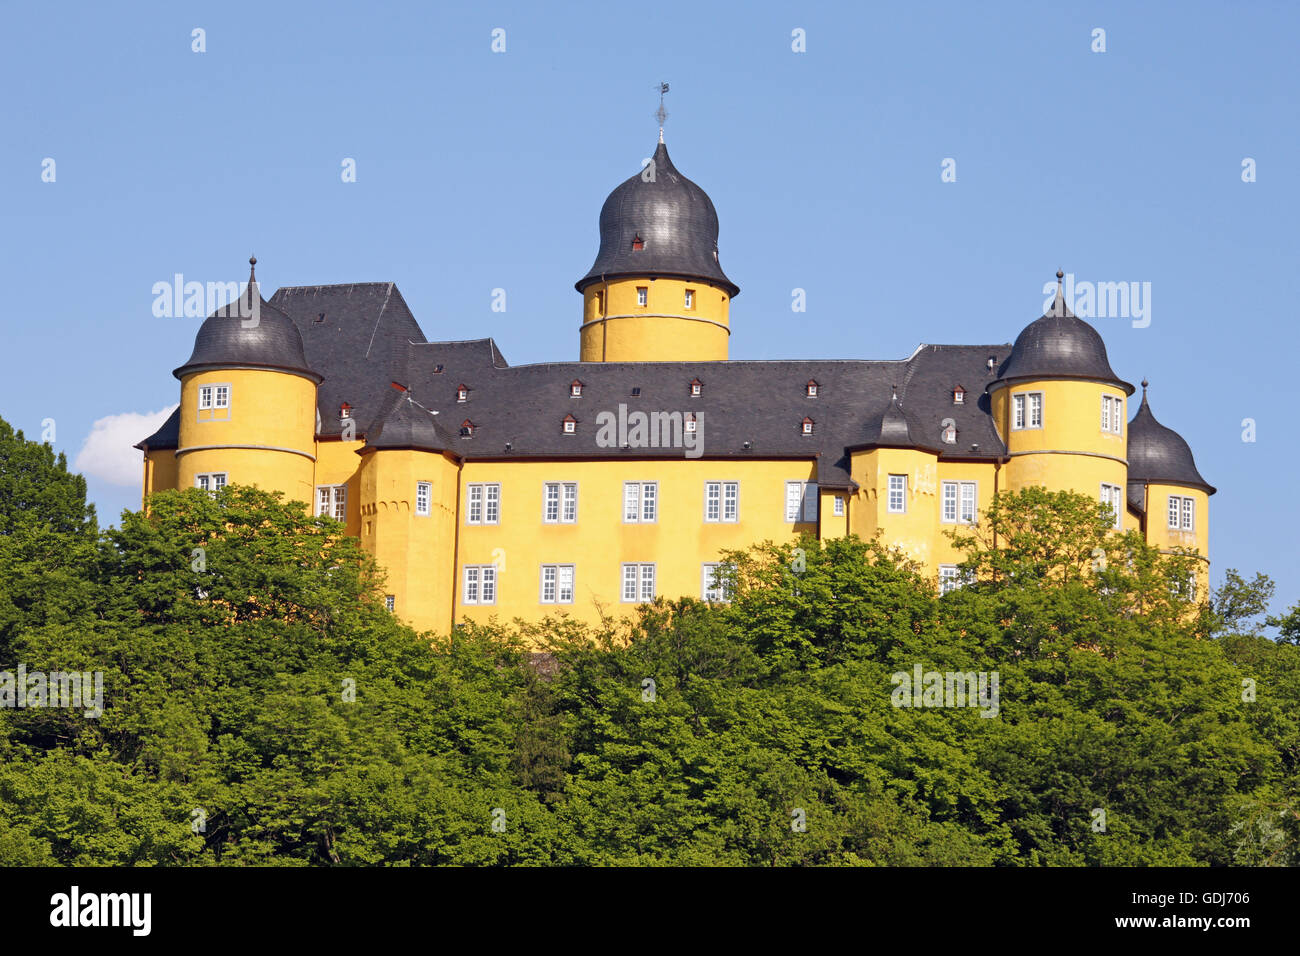 geography / travel, Germany, Rhineland Palatinate, Montabaur, castles, castle, built: 17th century, in 10th century by Duke Hermann von Schwaben as Humbach Castle, exterior view, Additional-Rights-Clearance-Info-Not-Available Stock Photo